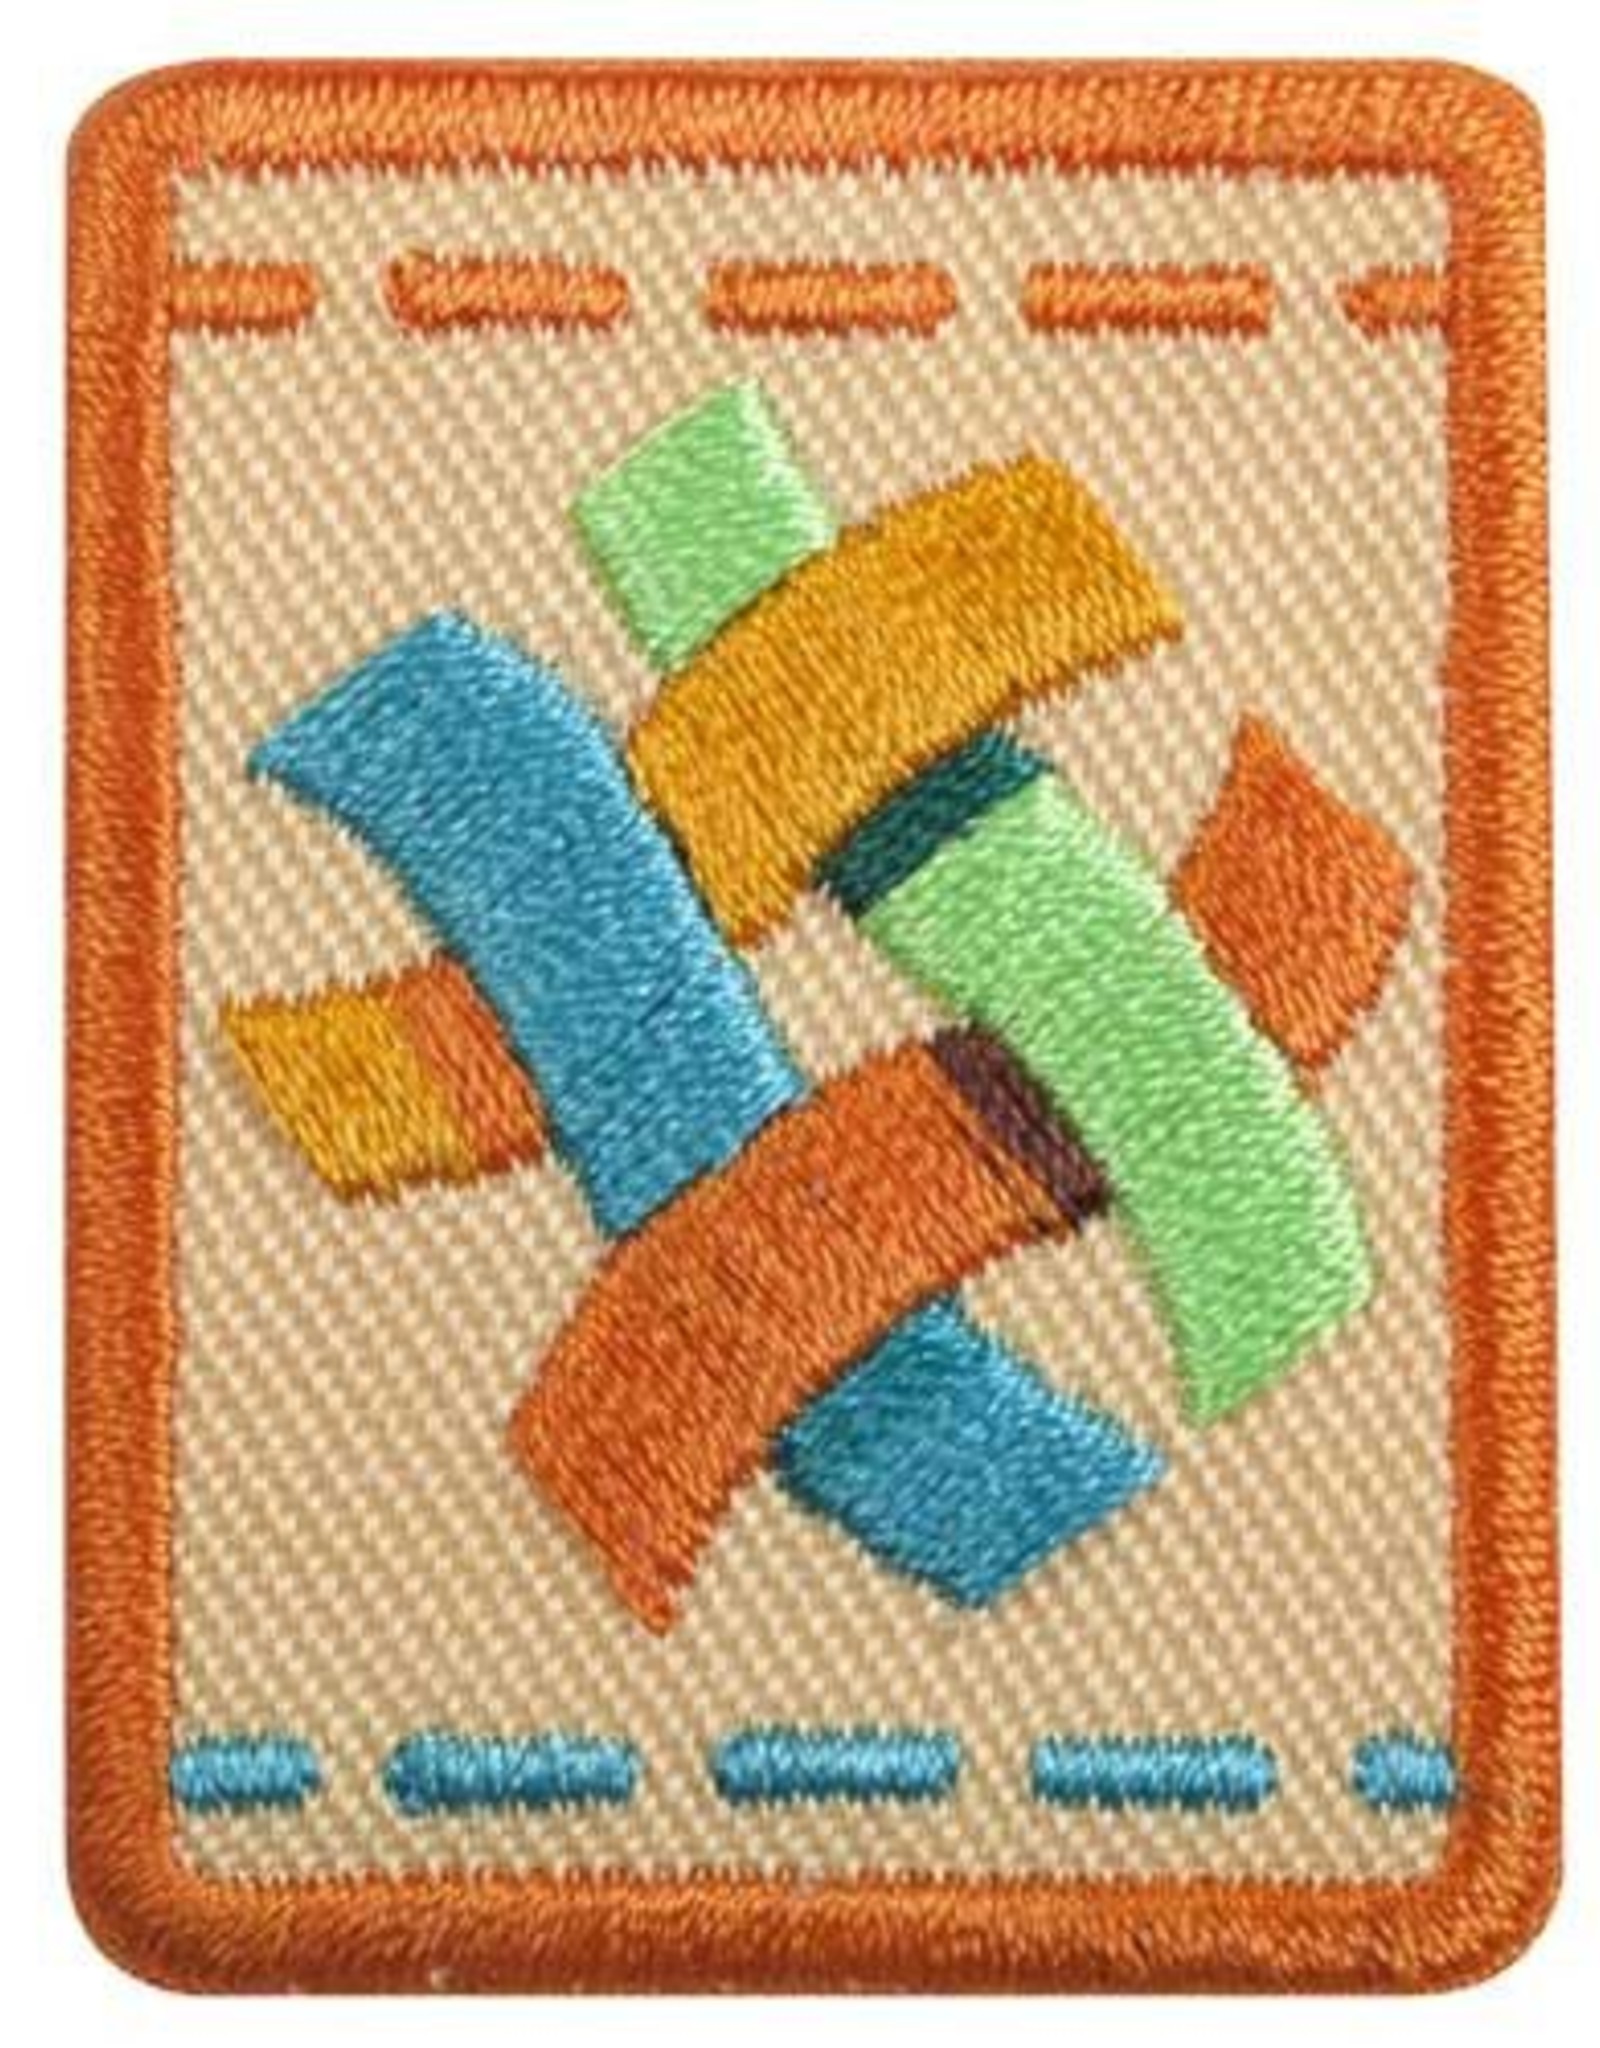 GIRL SCOUTS OF THE USA Senior Textile Artist Badge